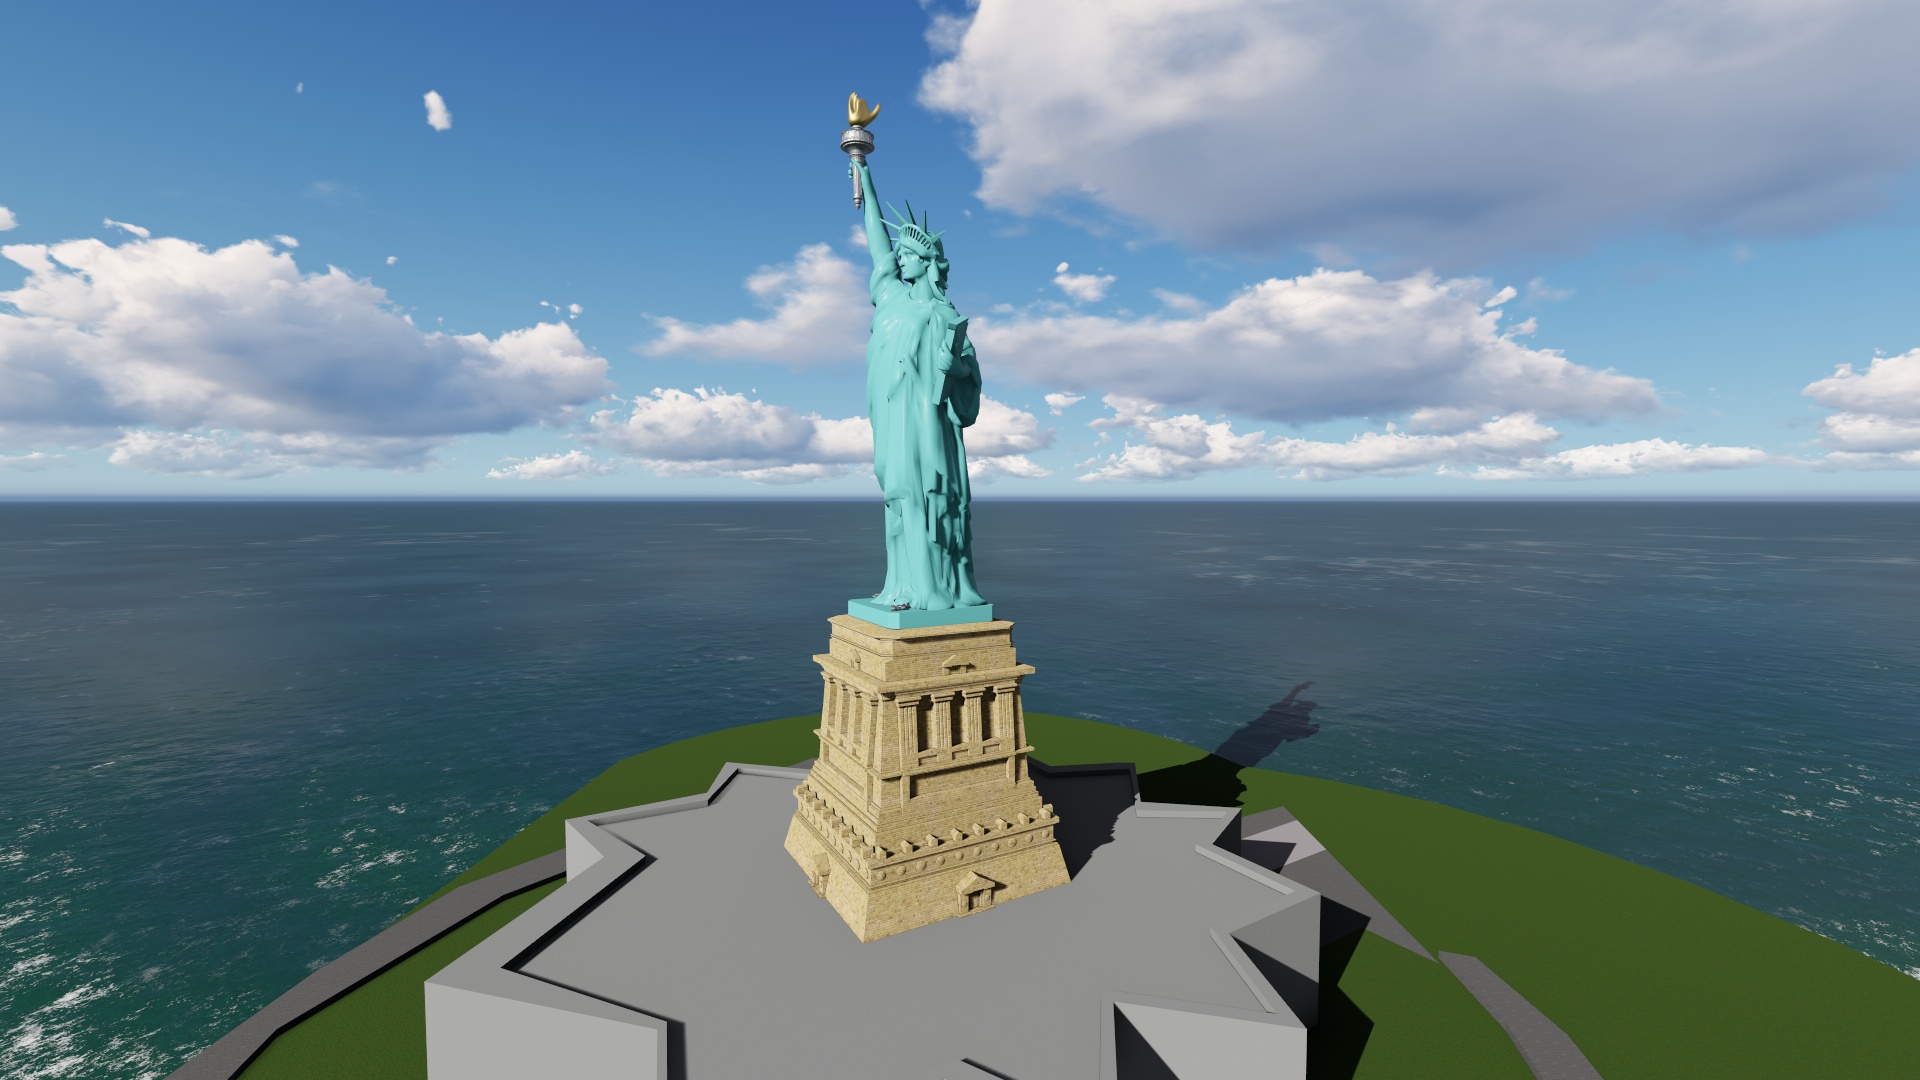 America’s MONUMENT OF LIBERTY v2 by abdouarchitecte | 3DOcean